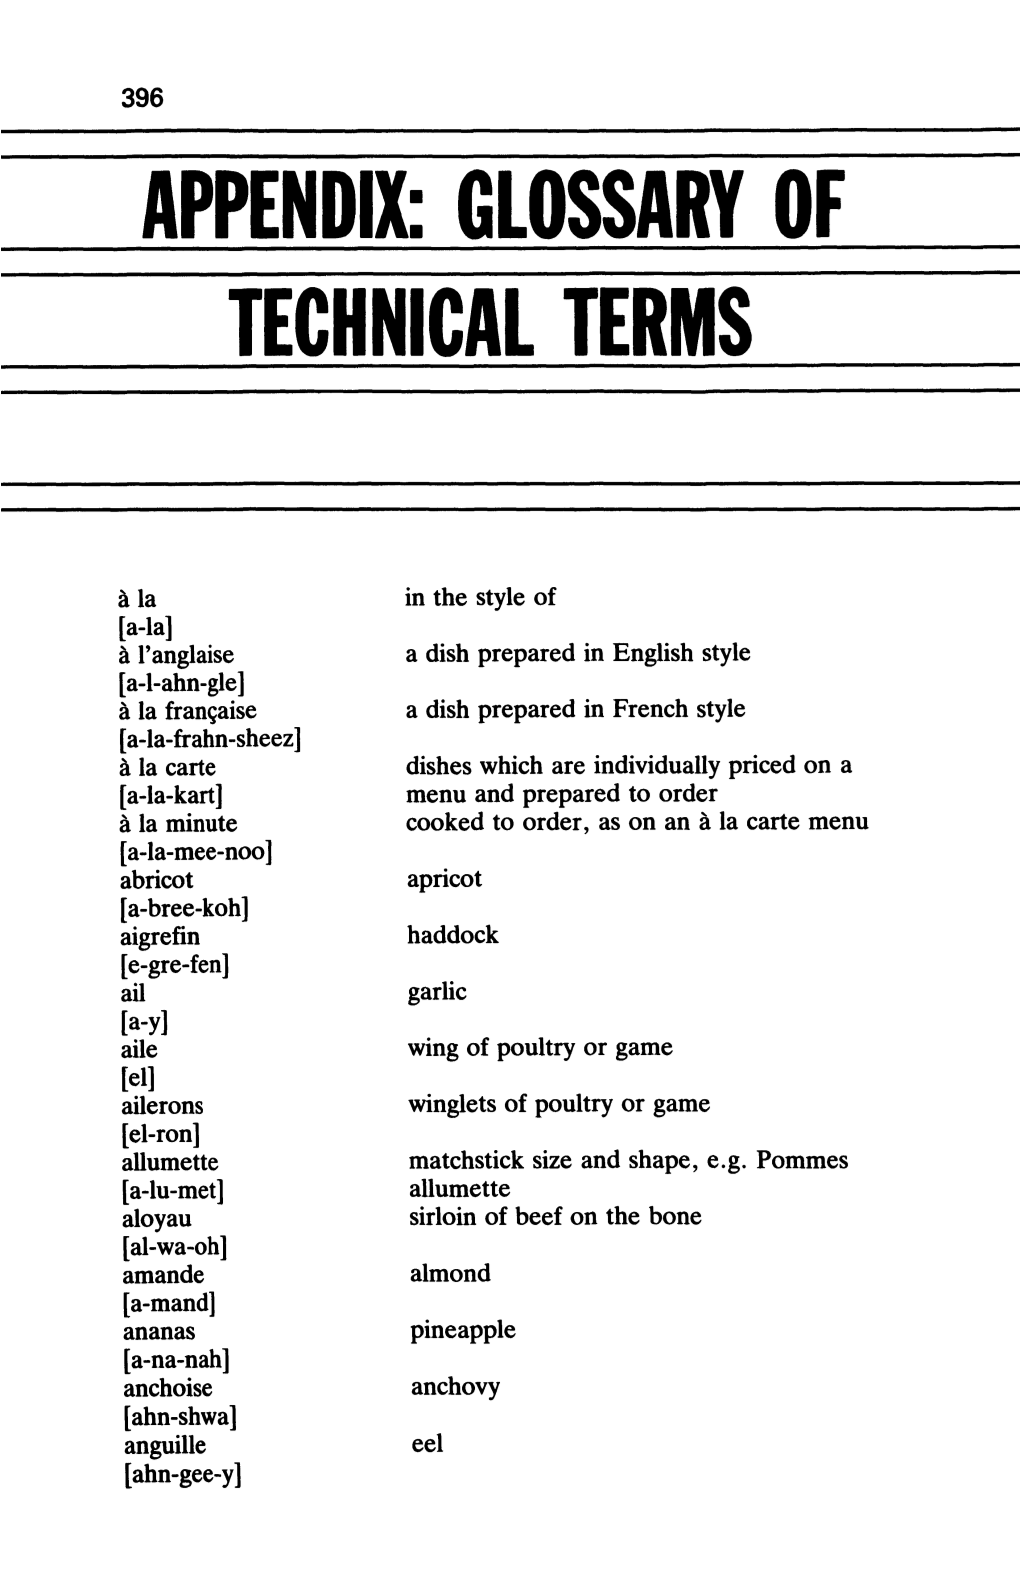 Appendix: Glossary of Technical Terms